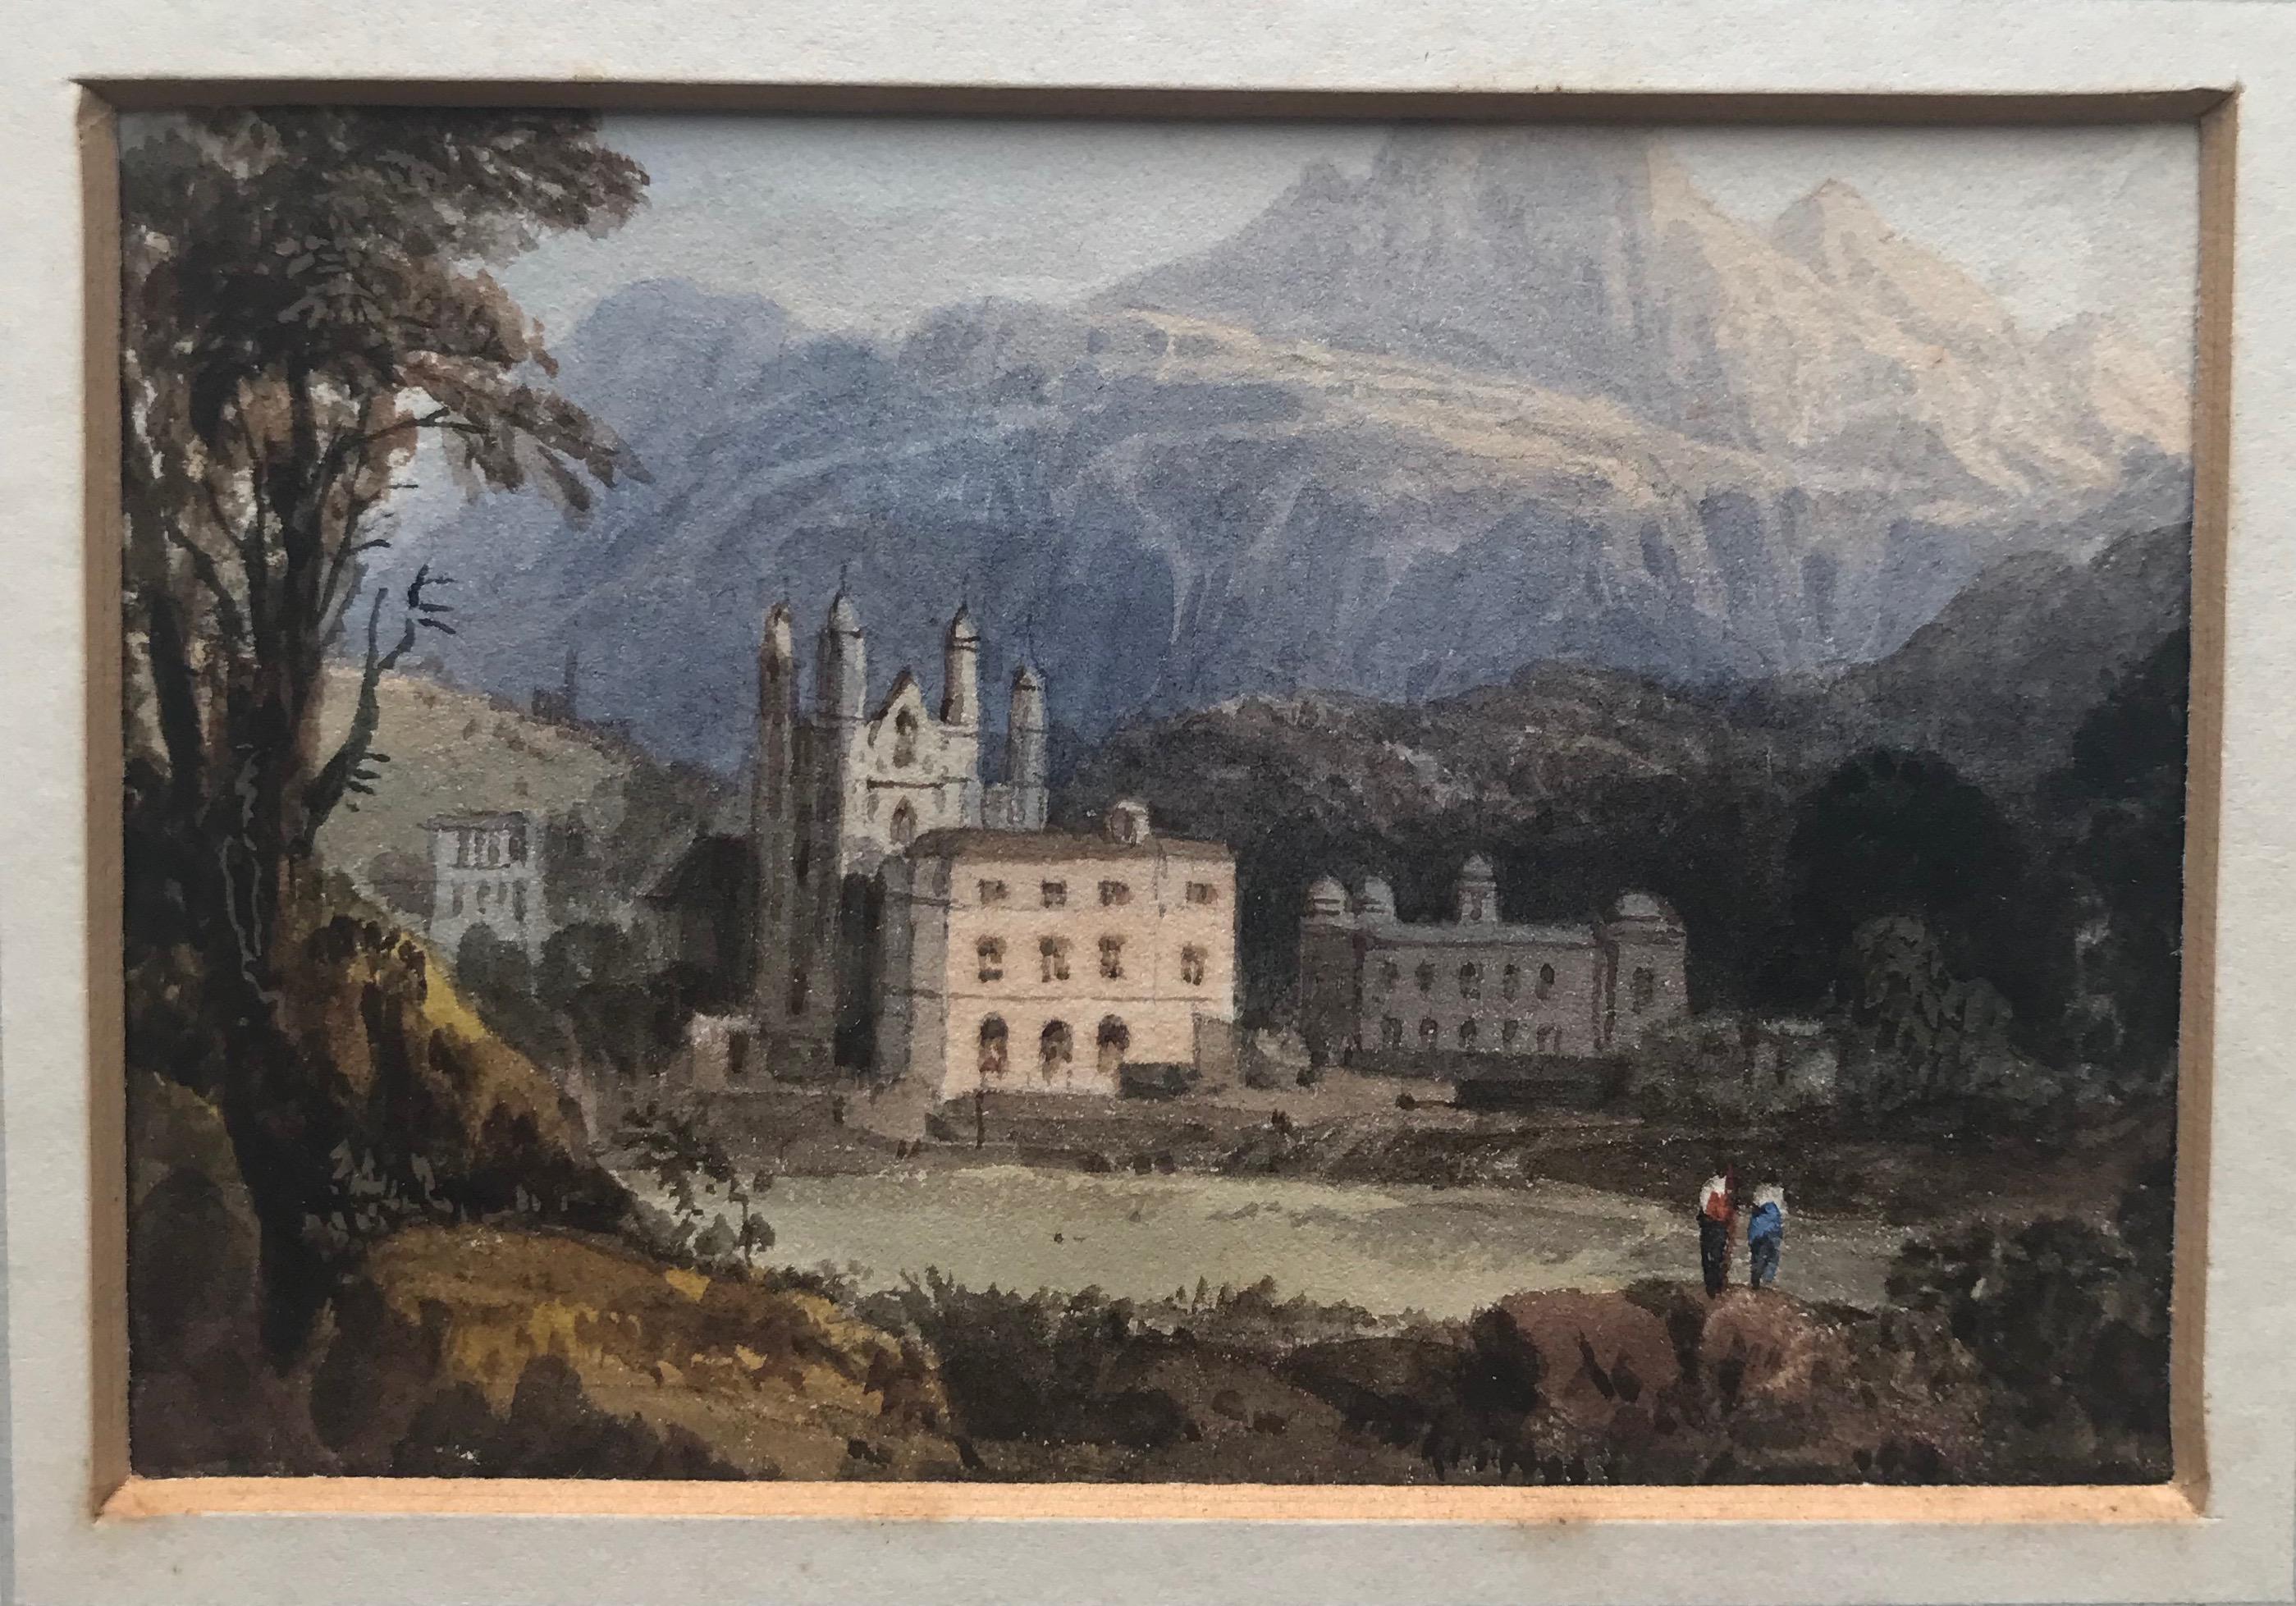 William Crouch, view of a country estate in the mountains